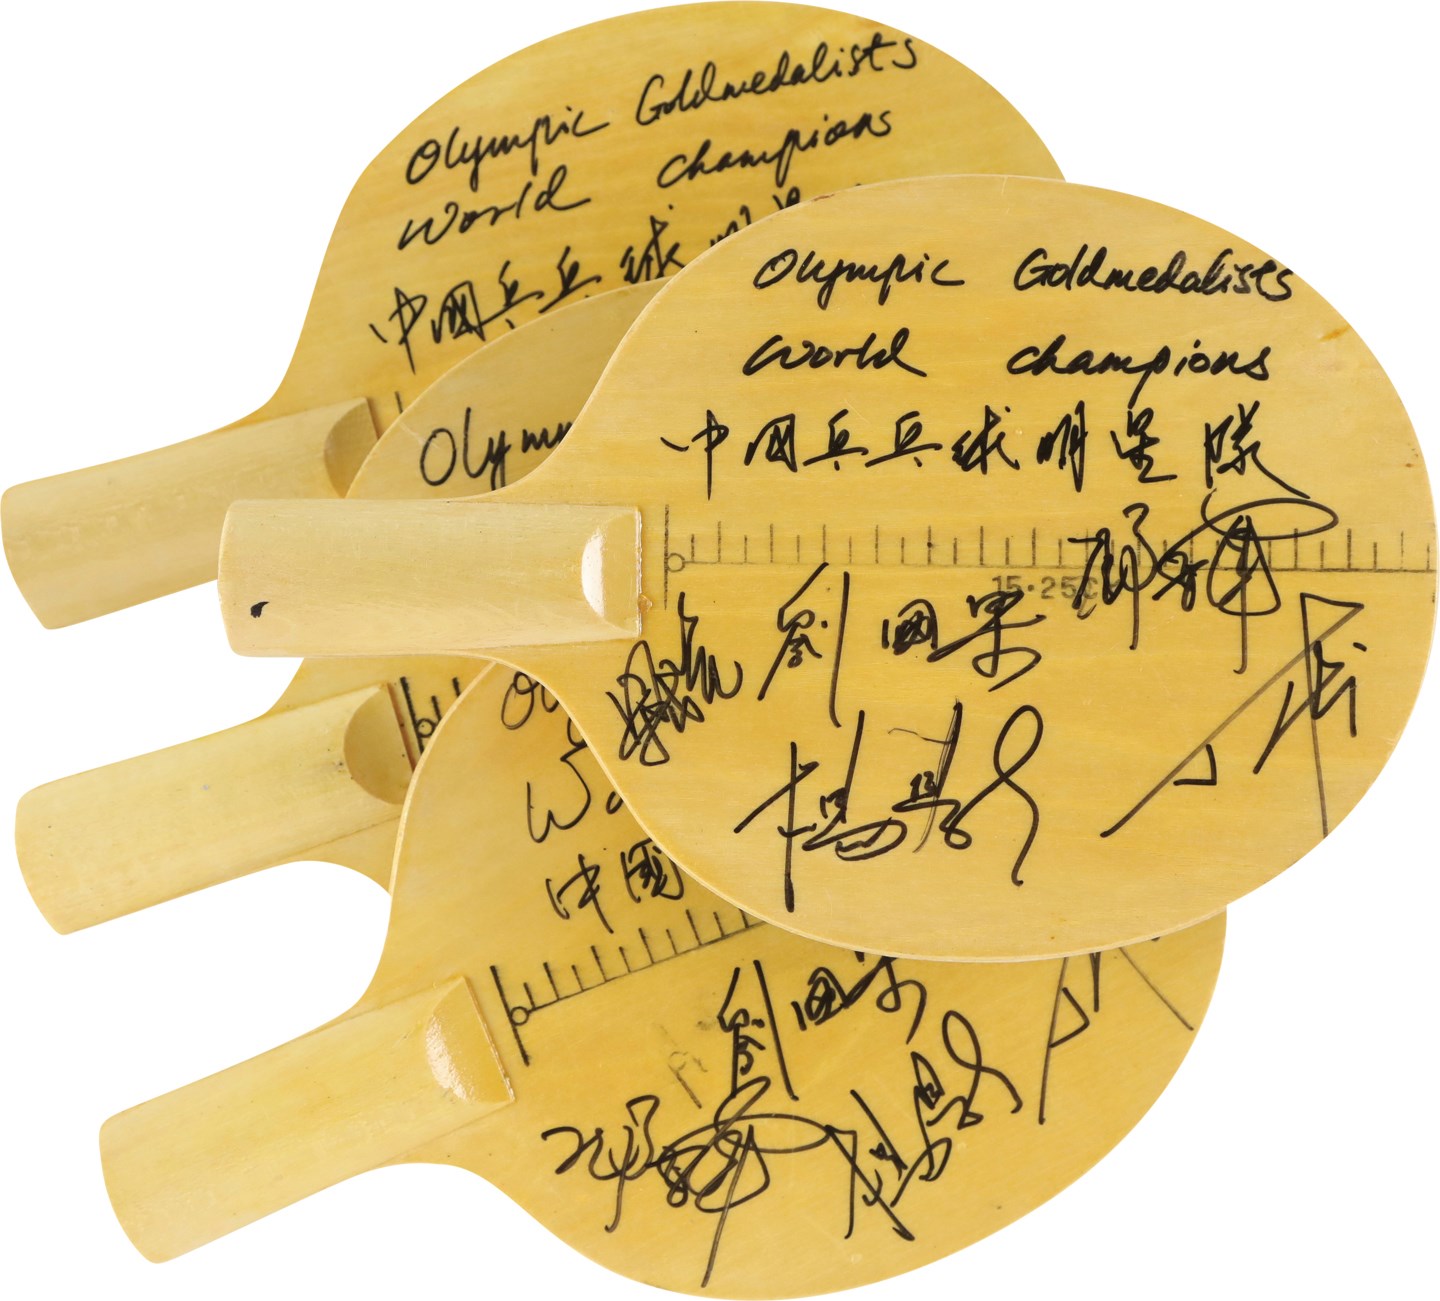 Olympics and All Sports - 1997 Team China Champions World Table Tennis Team-Signed Paddles (4)